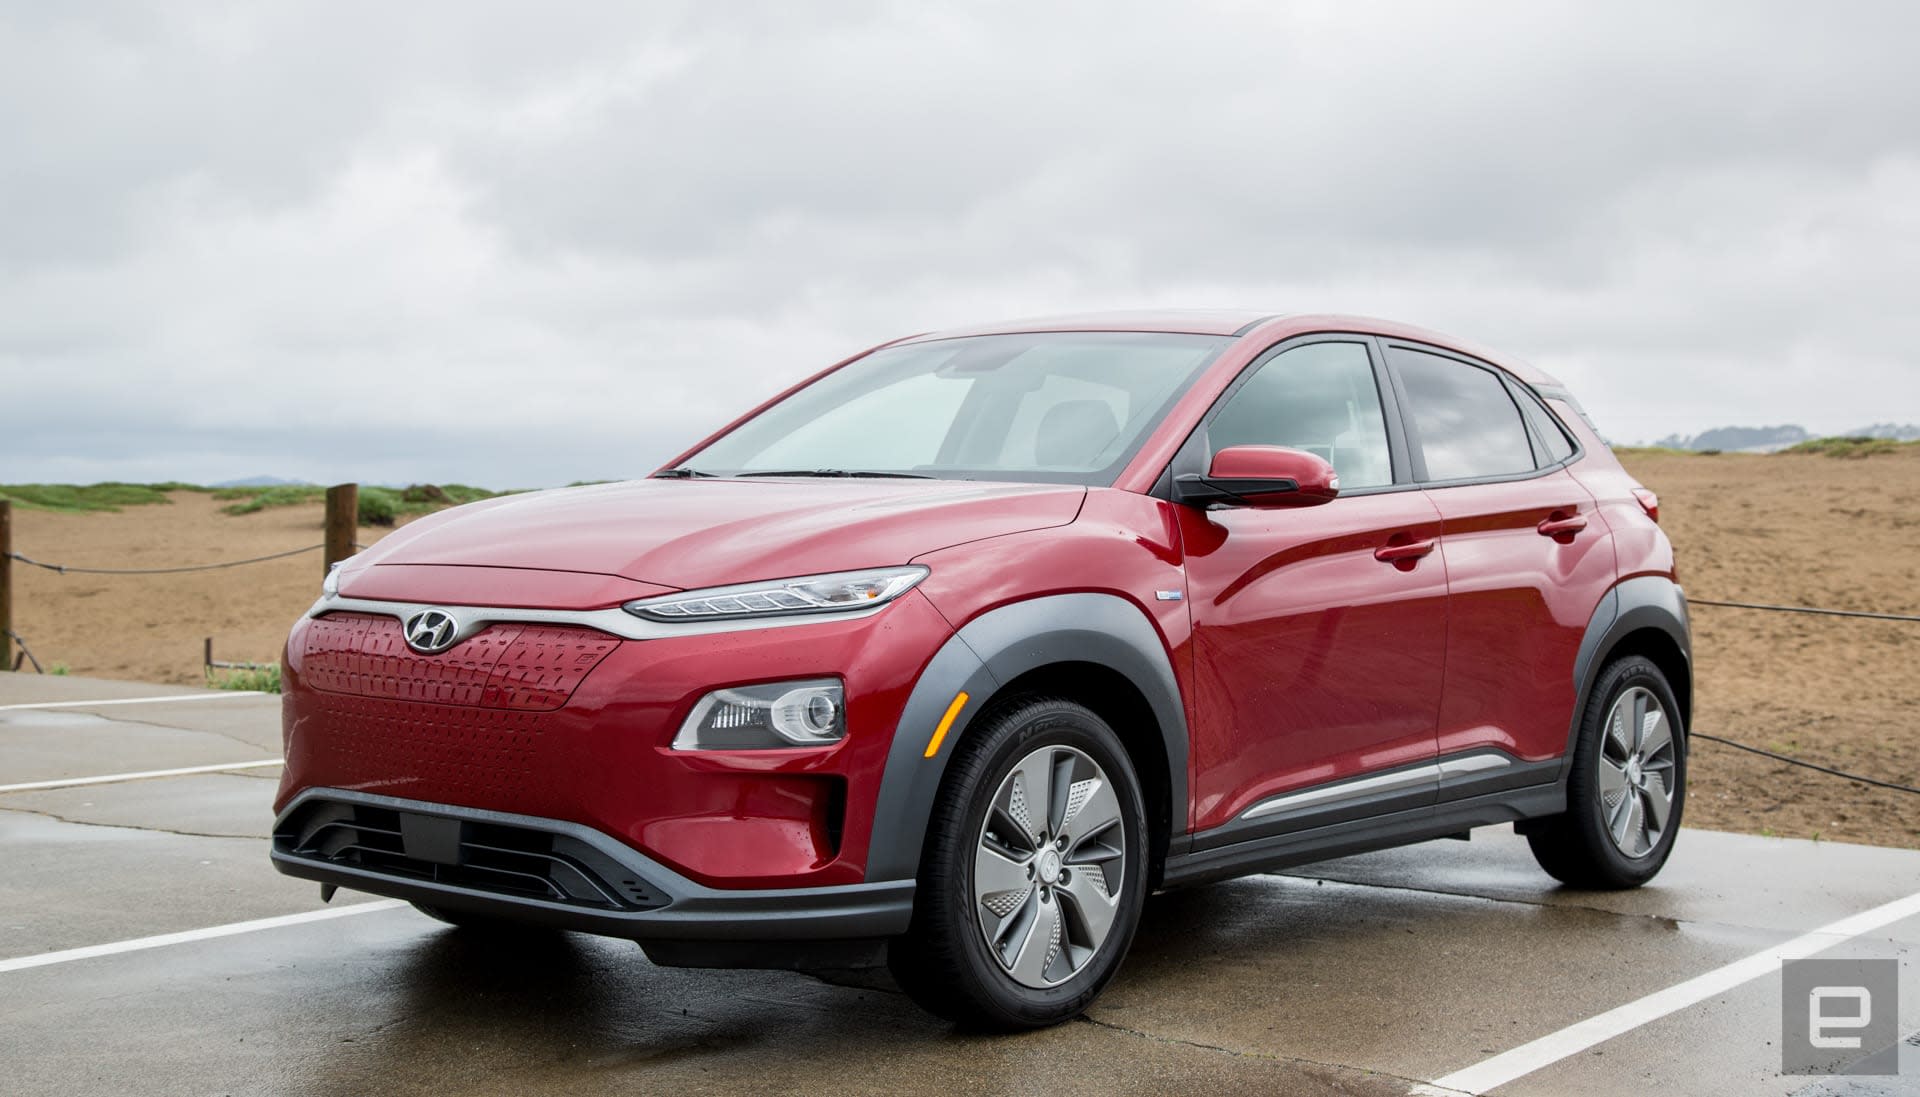 Hyundai’s Kona EV is the car you didn't know you were waiting for